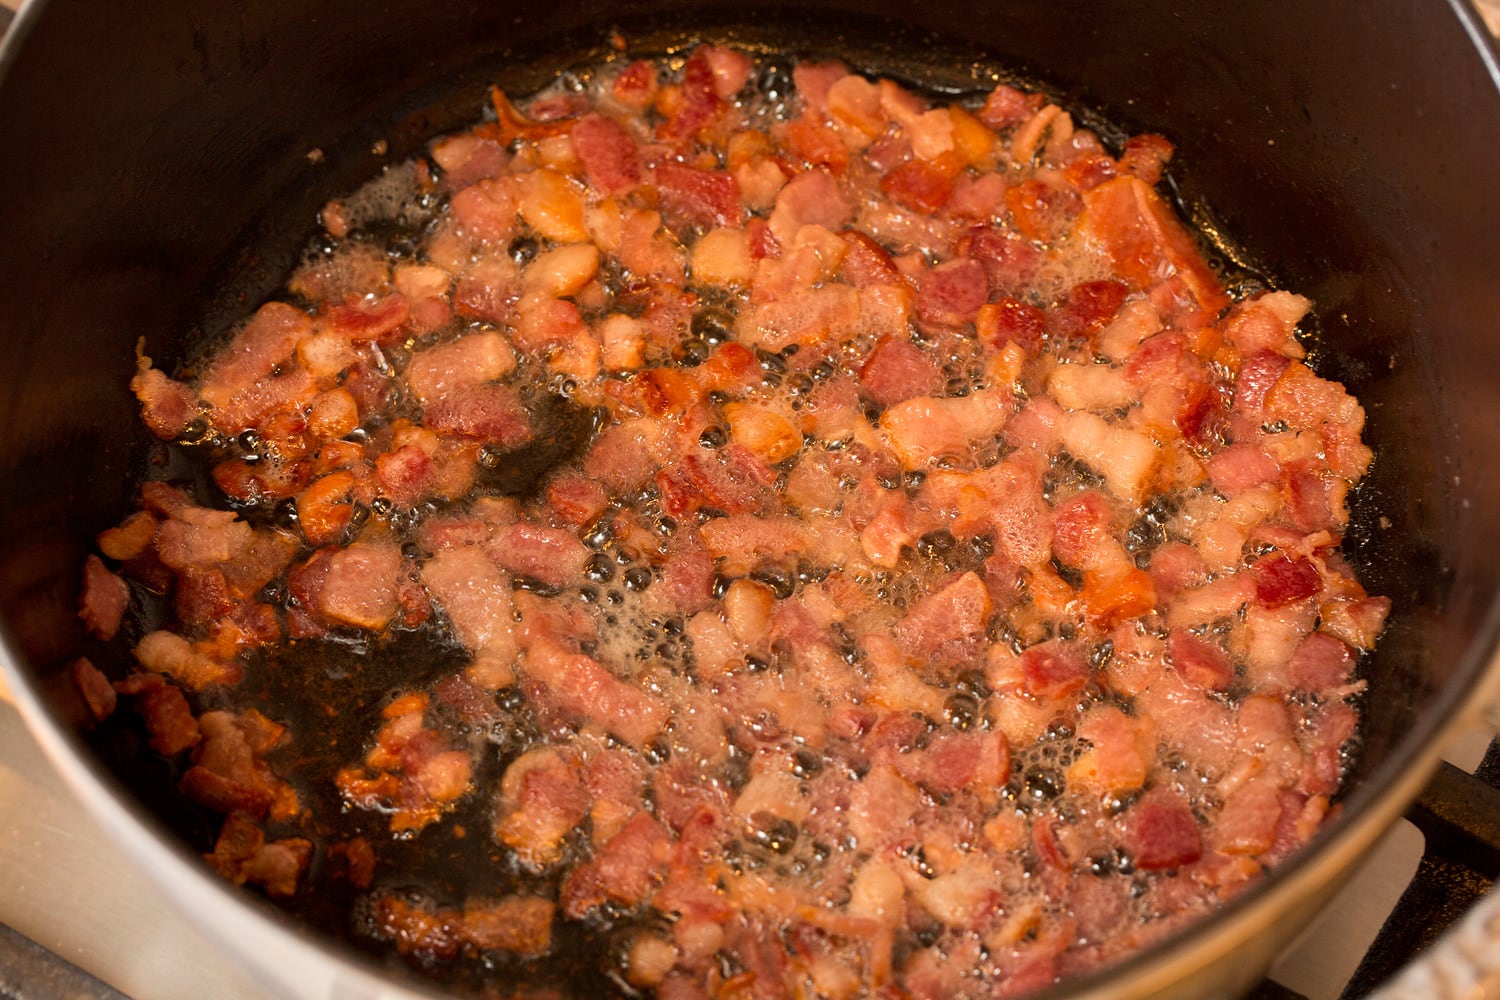 Cooked bacon in pot.